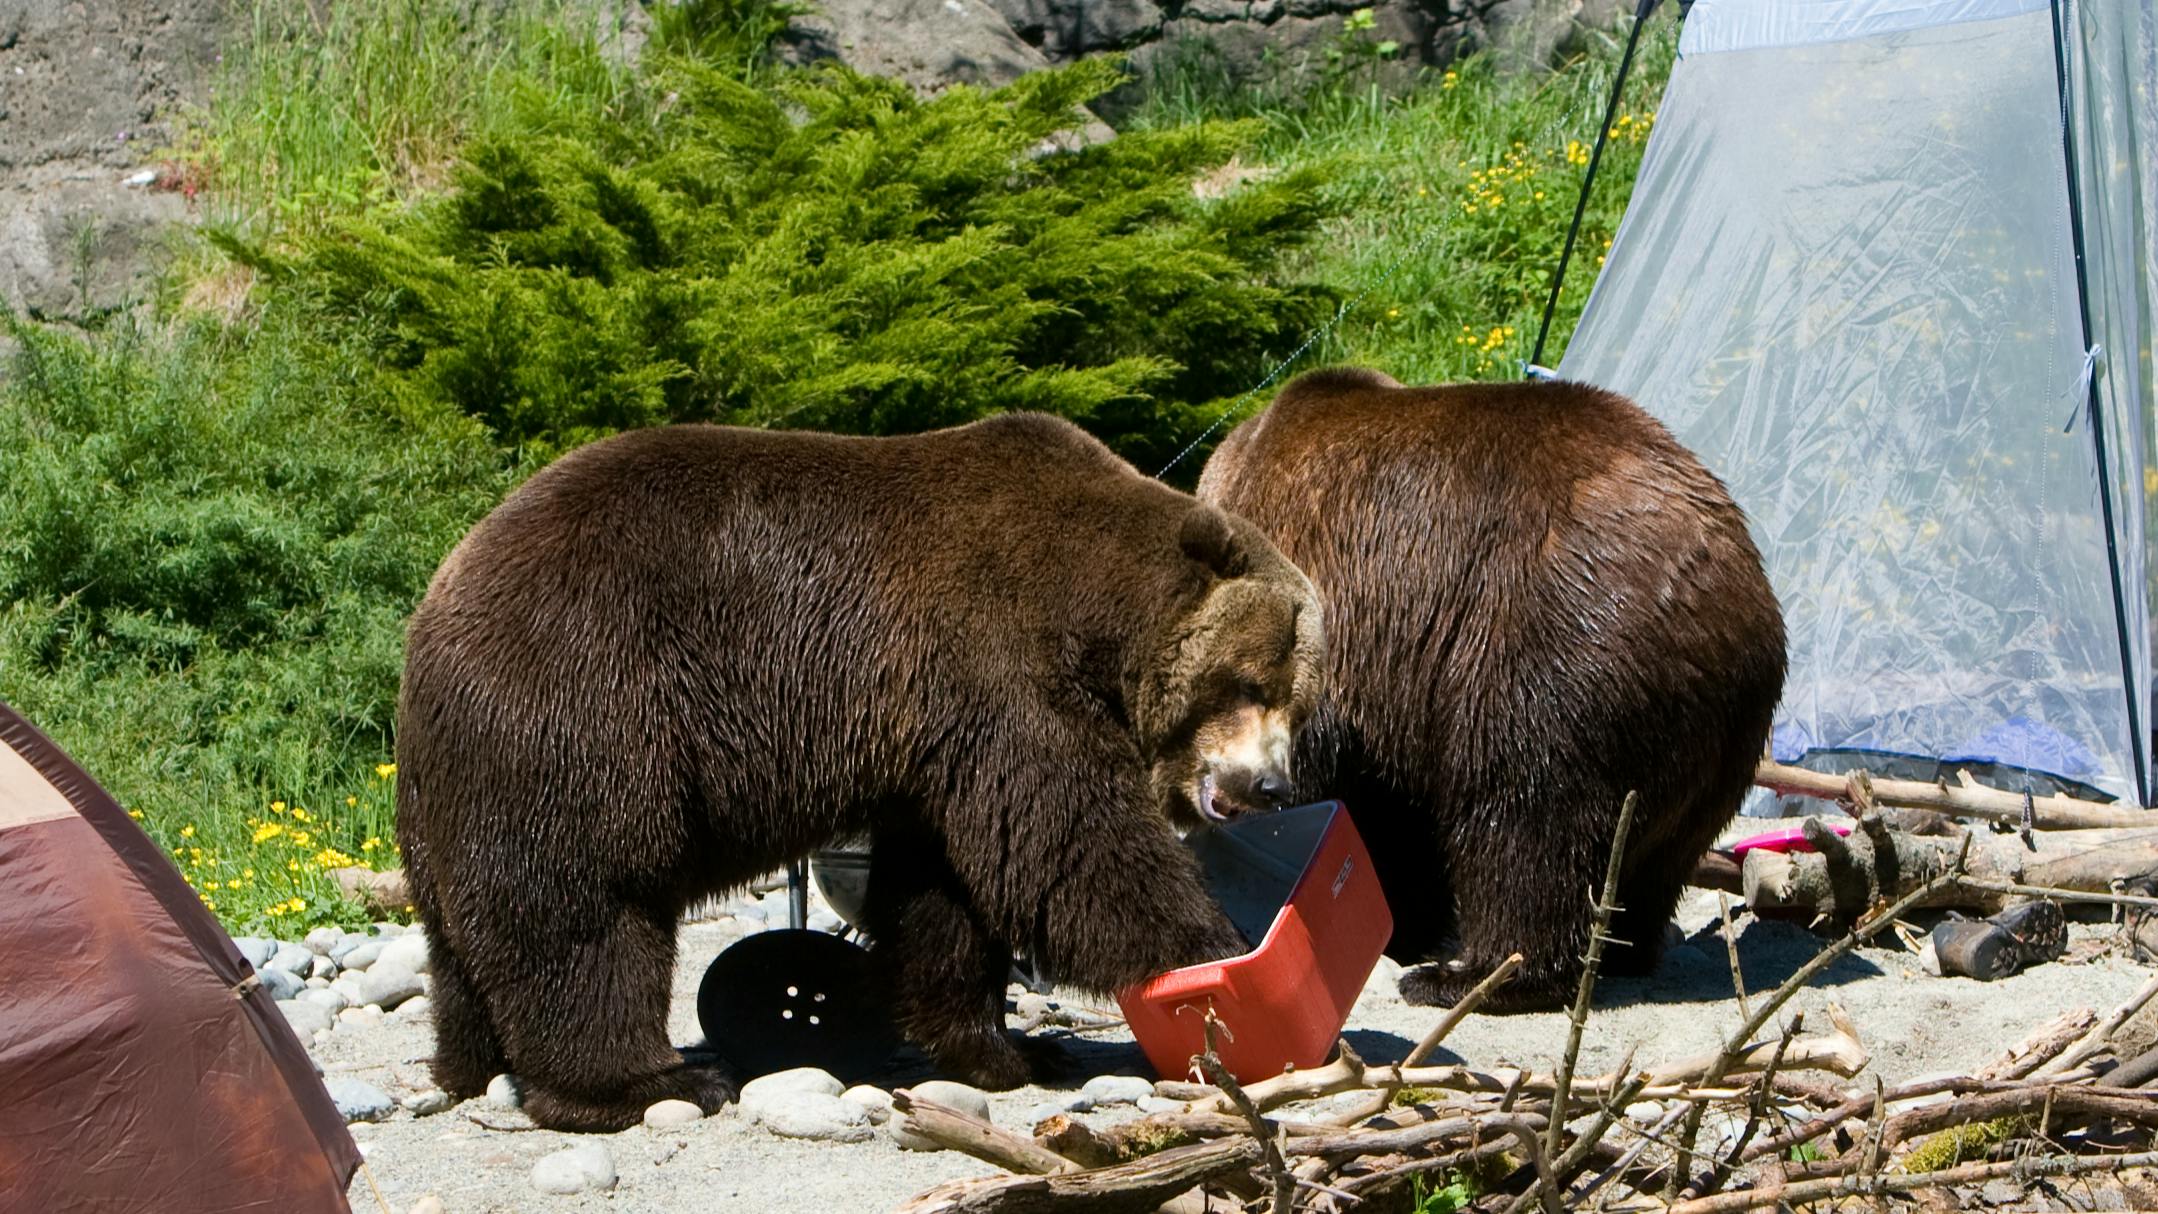 Two bears getting into a campsite. They are in a cooler and have ransacked the camp. 